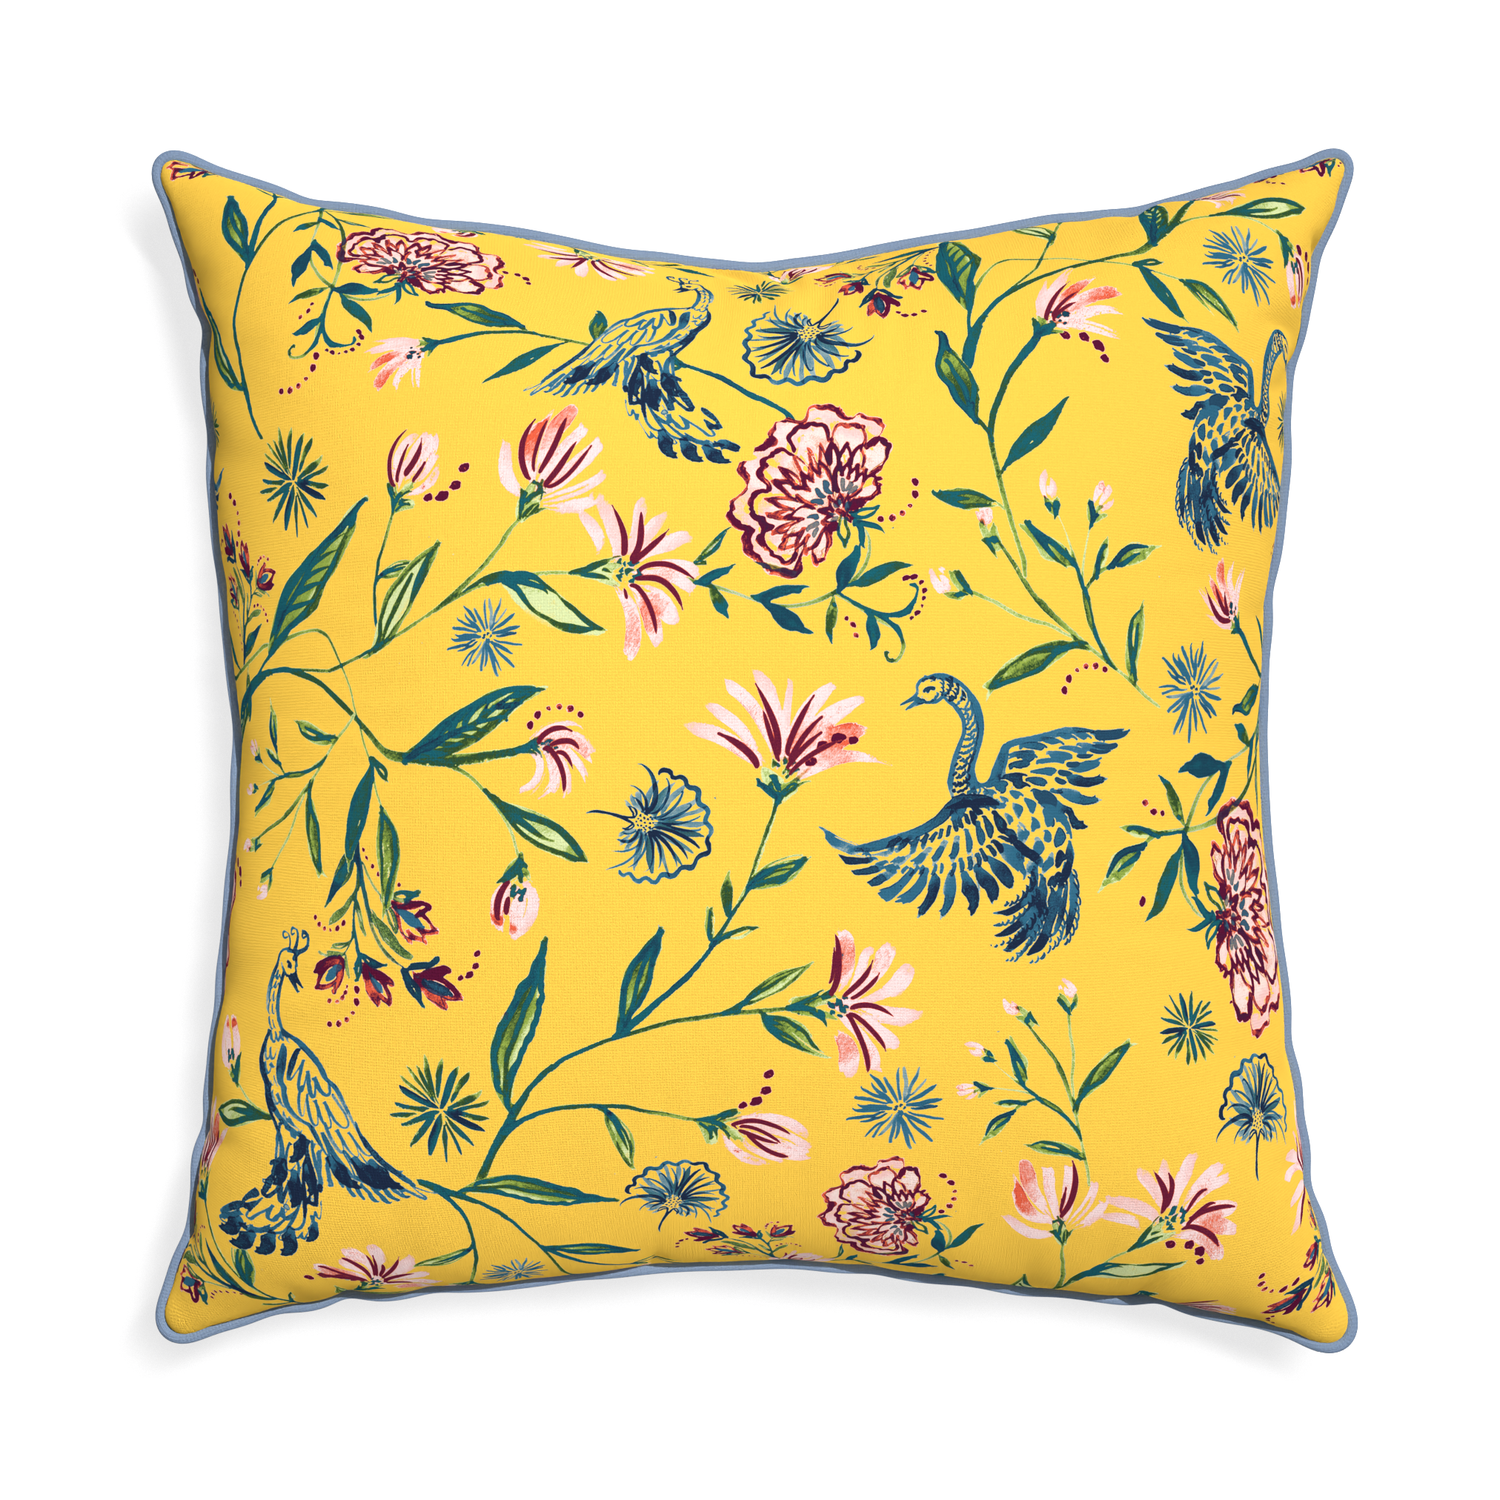 Euro-sham daphne canary custom pillow with sky piping on white background